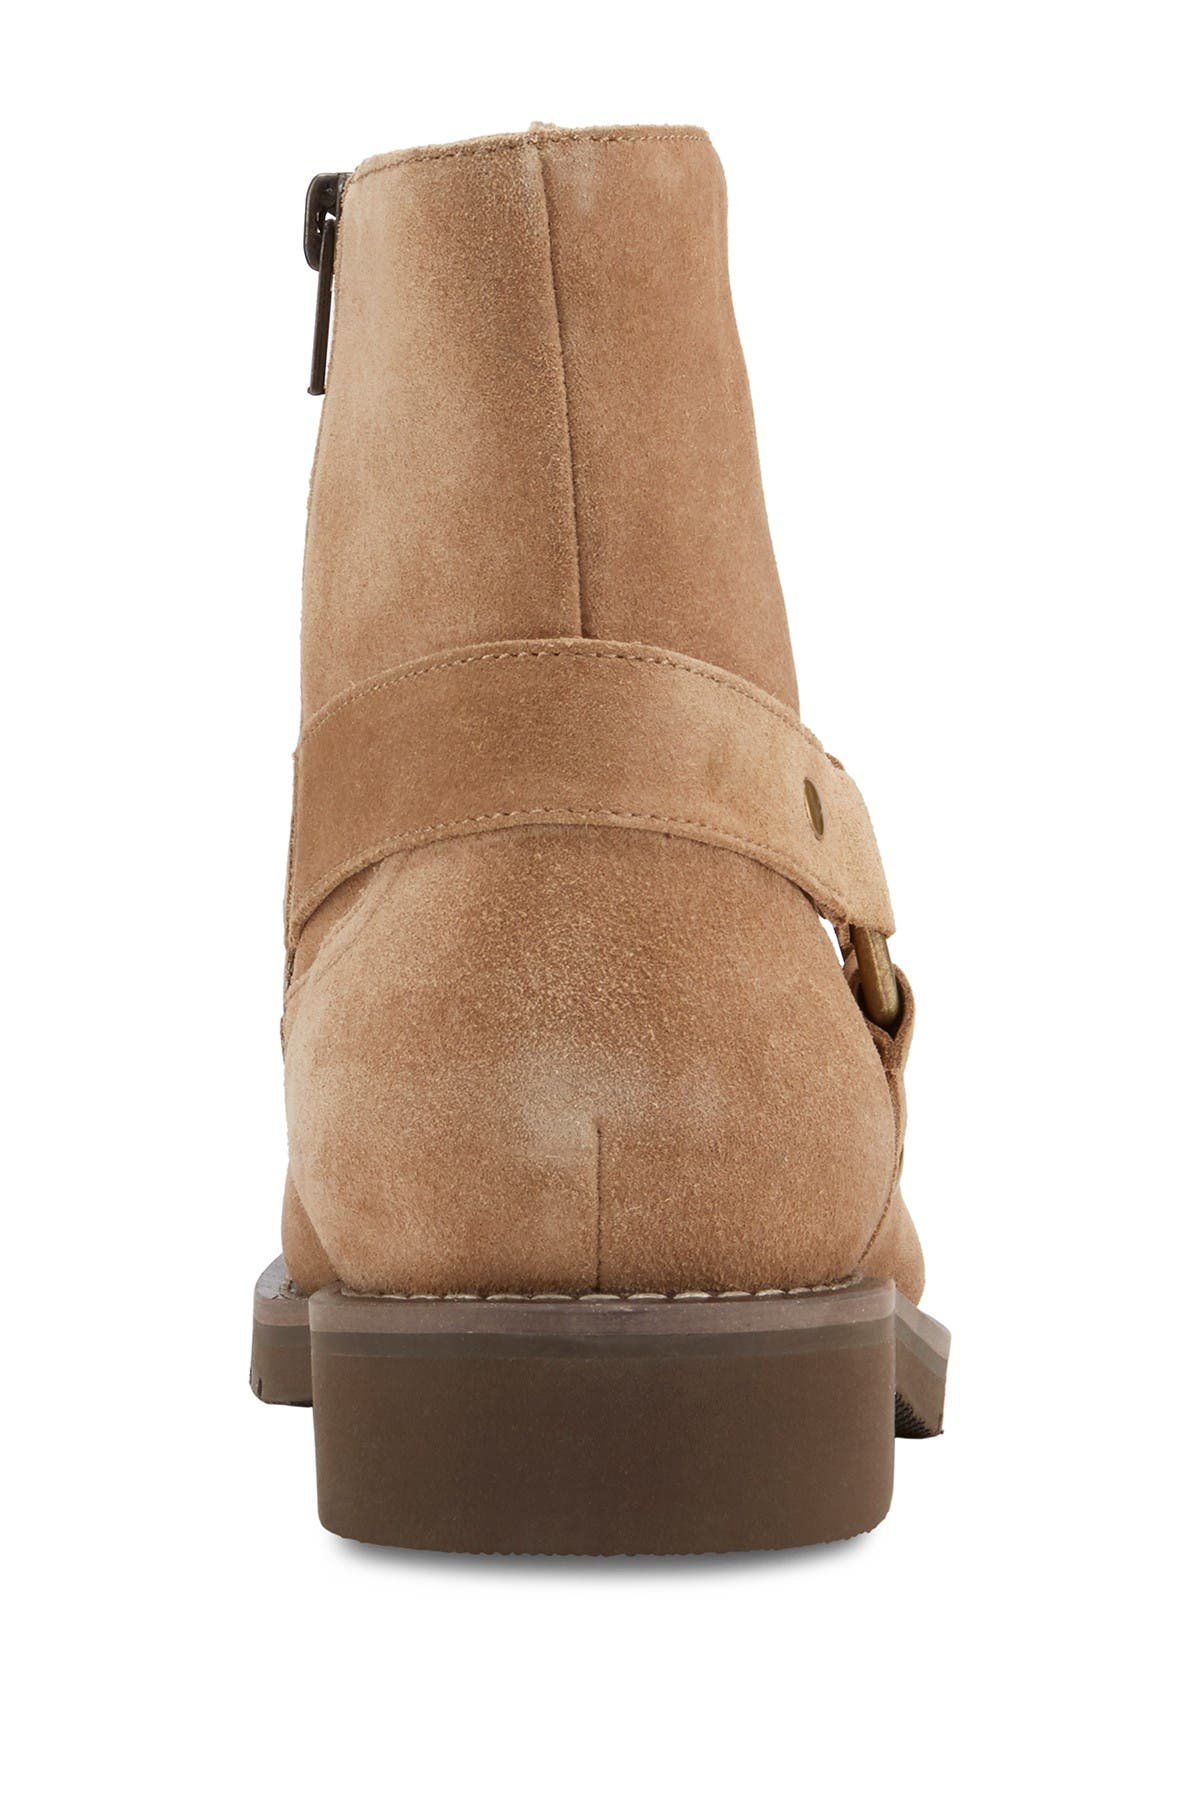 vintage foundry dress sports suede chelsea boot